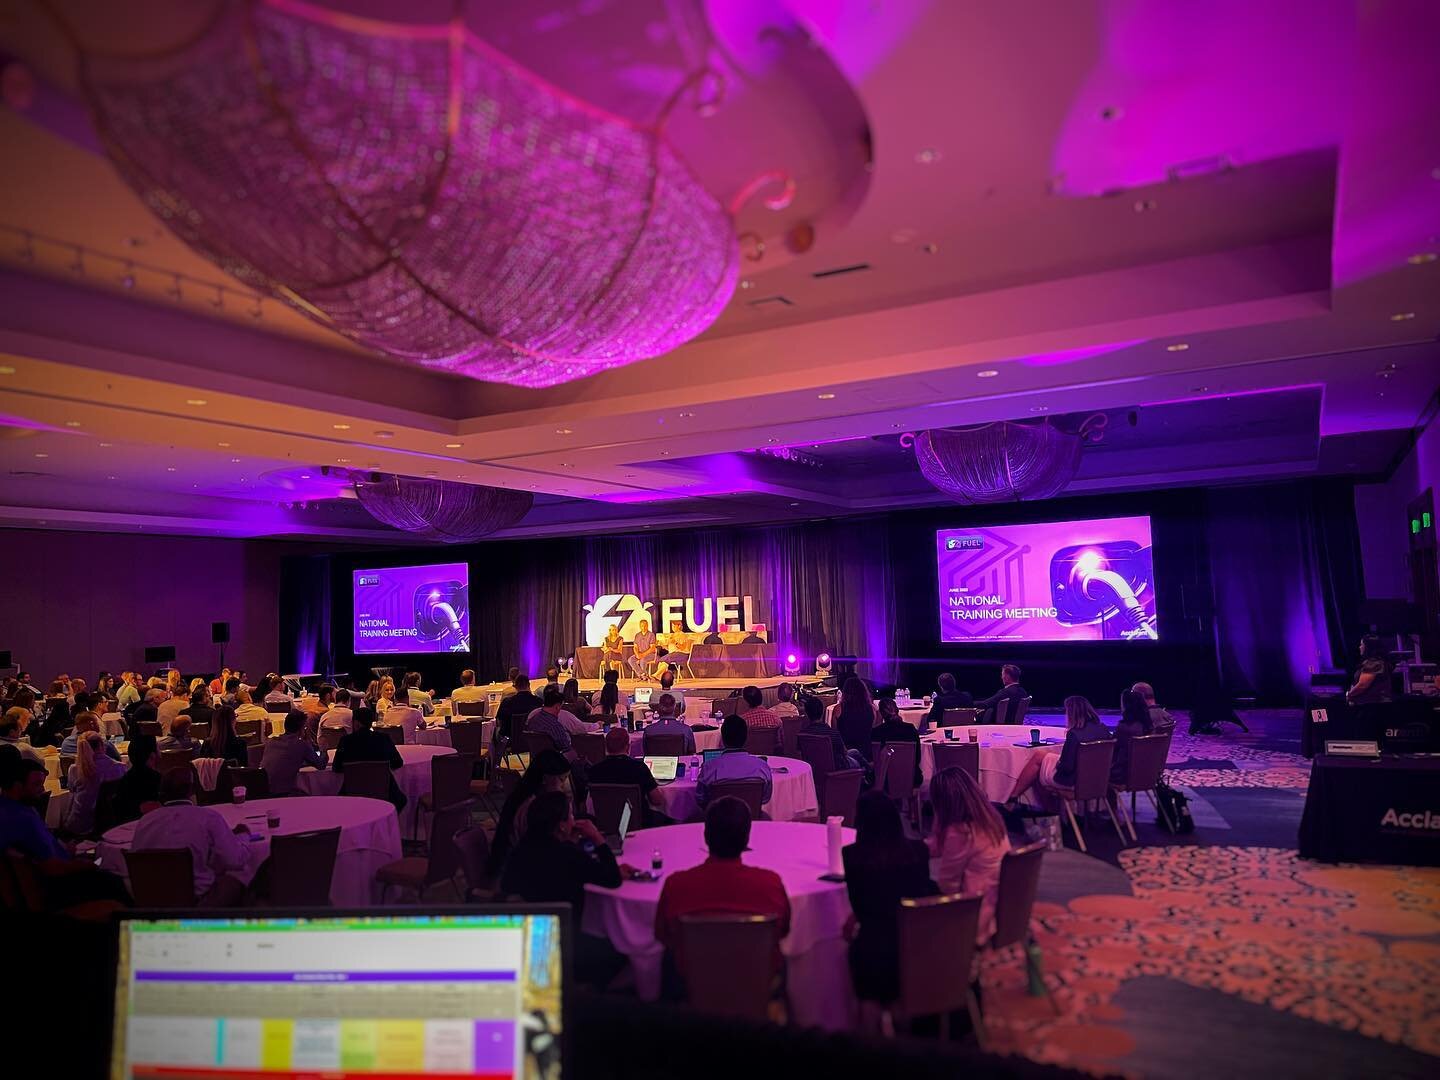 We&rsquo;re back at it here in Austin at the @hiltonaustintx for a National Training Meeting! #production #producer #events #audiovisual #weloveourclients